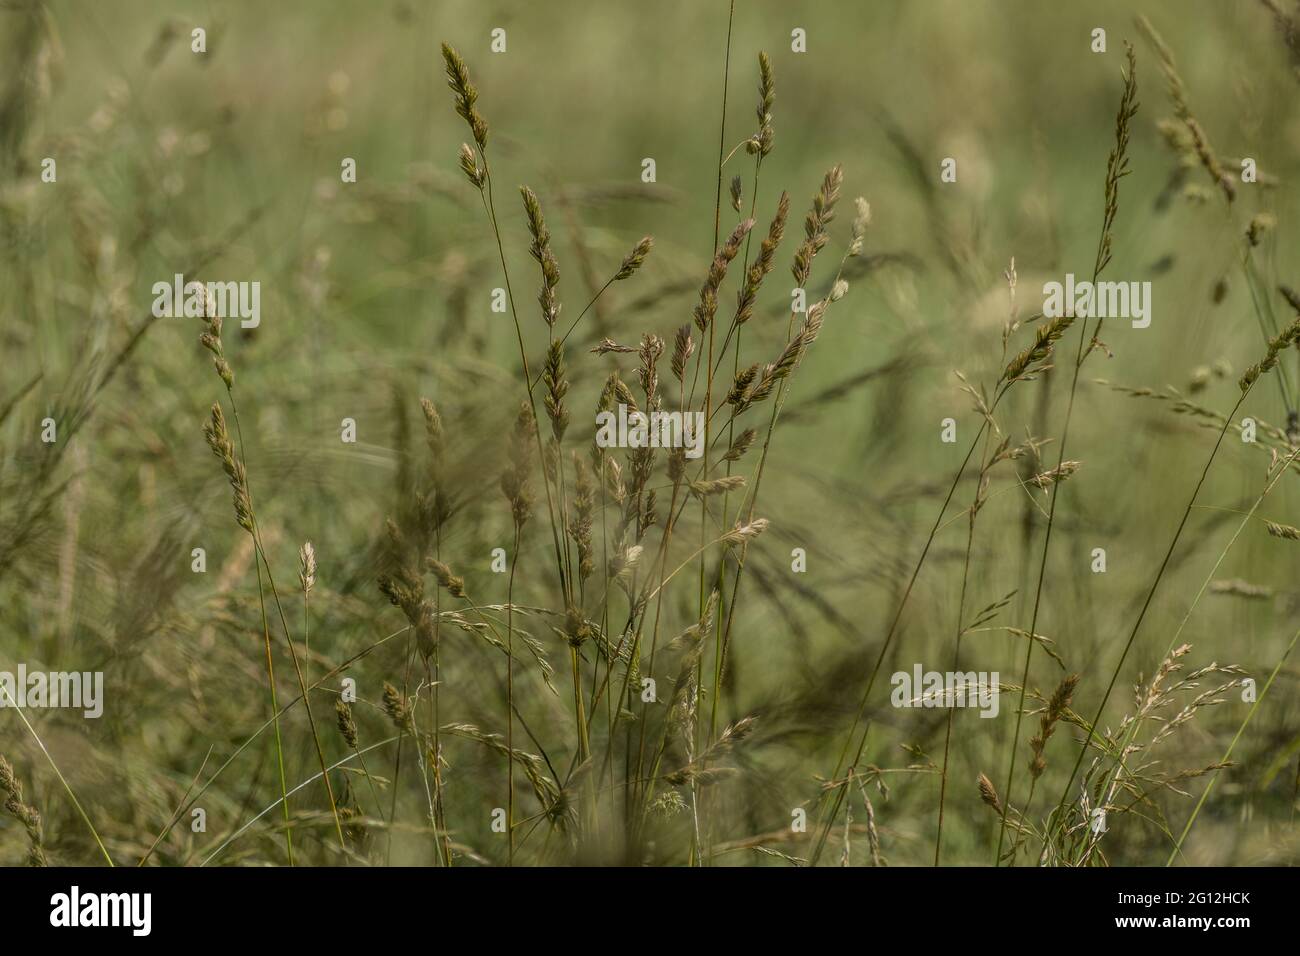 Dry tall grasses with seed heads ready to disperse in an open field for new growth in the springtime closeup Stock Photo